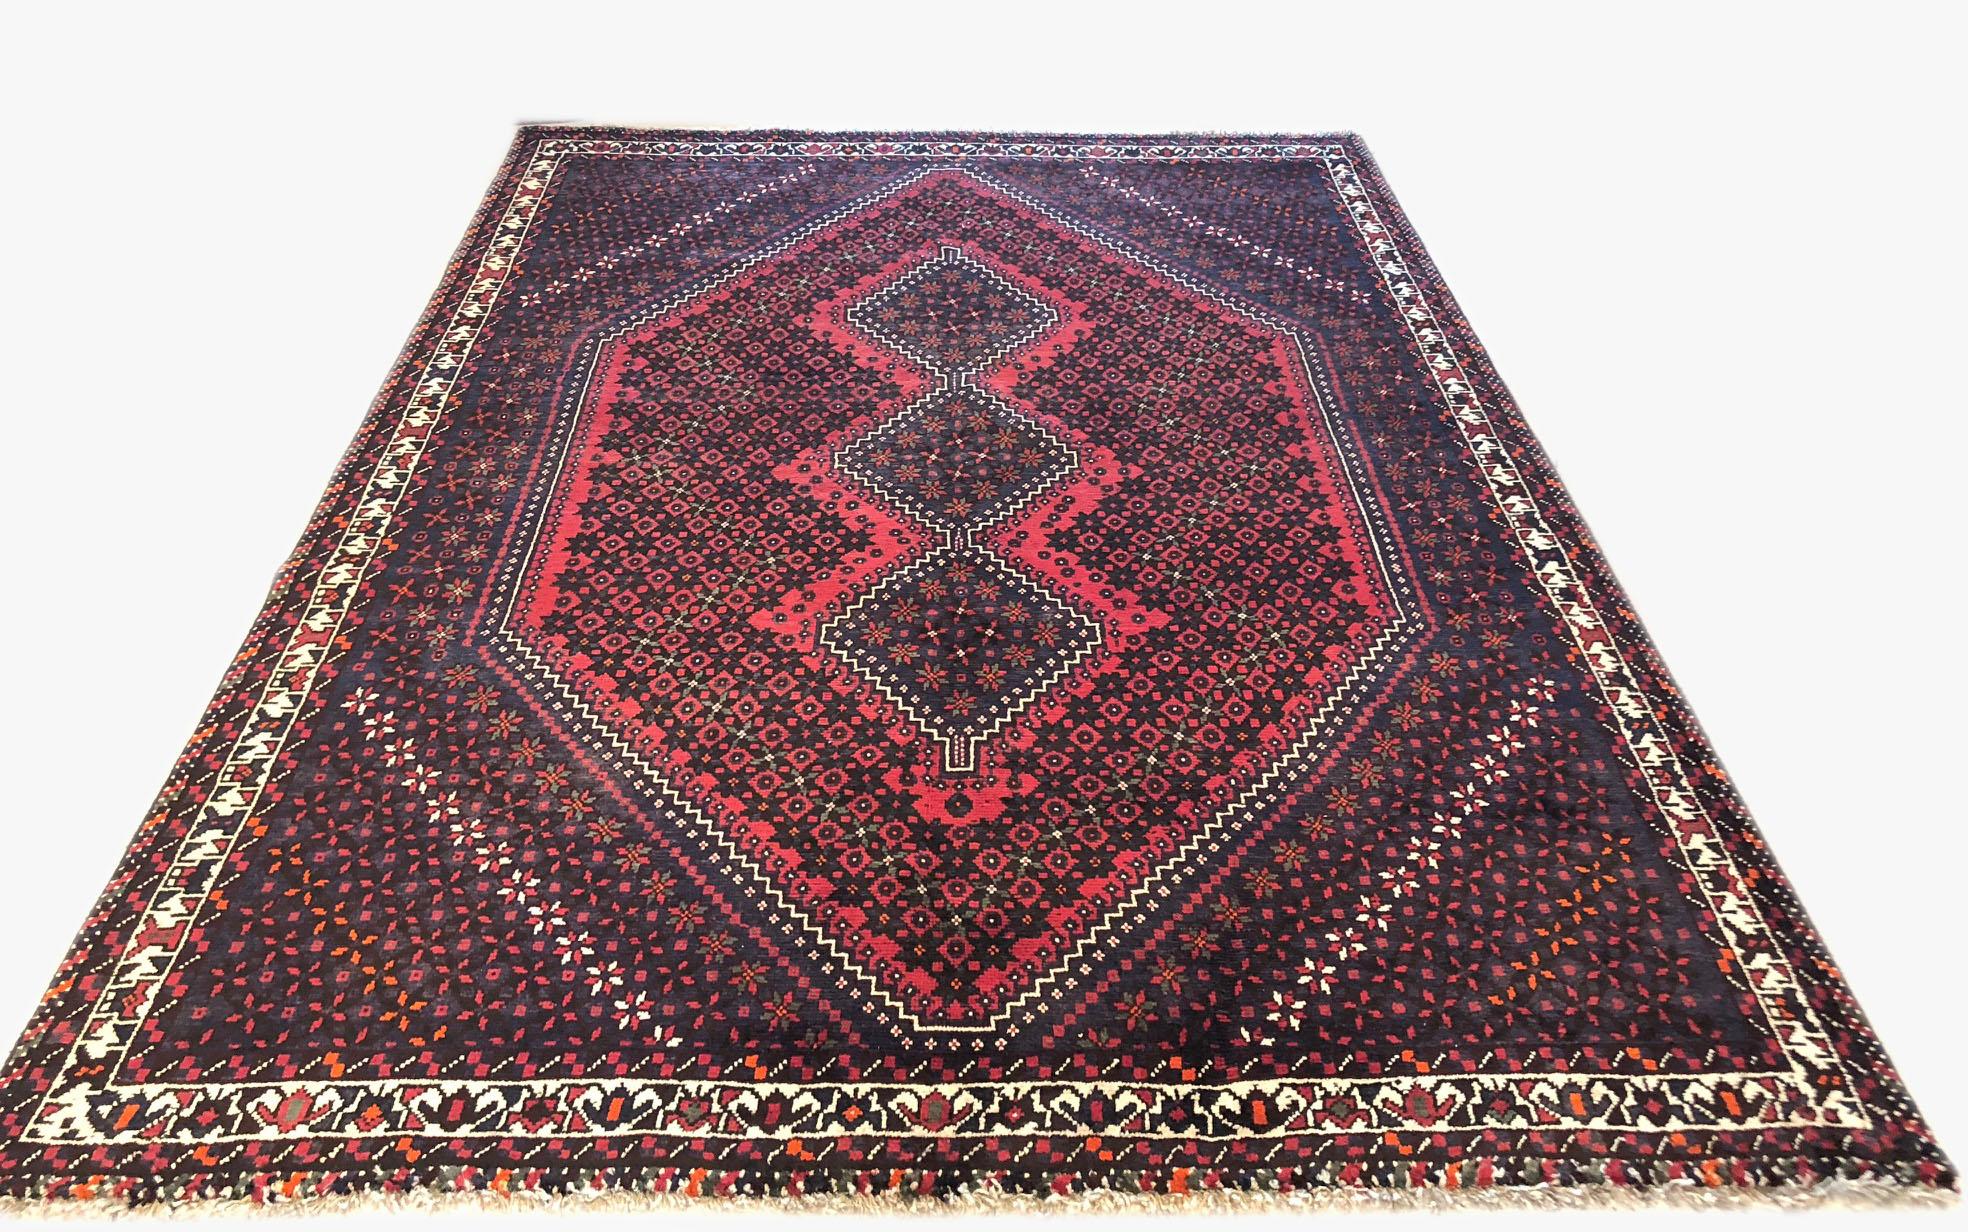 This rug is an authentic rug from Iran, Shiraz. The pile and foundation are wool. The base color is red and dark brown. The design is geometric with repeated diamond medallion. This piece is a great choice for both traditional and transitional home